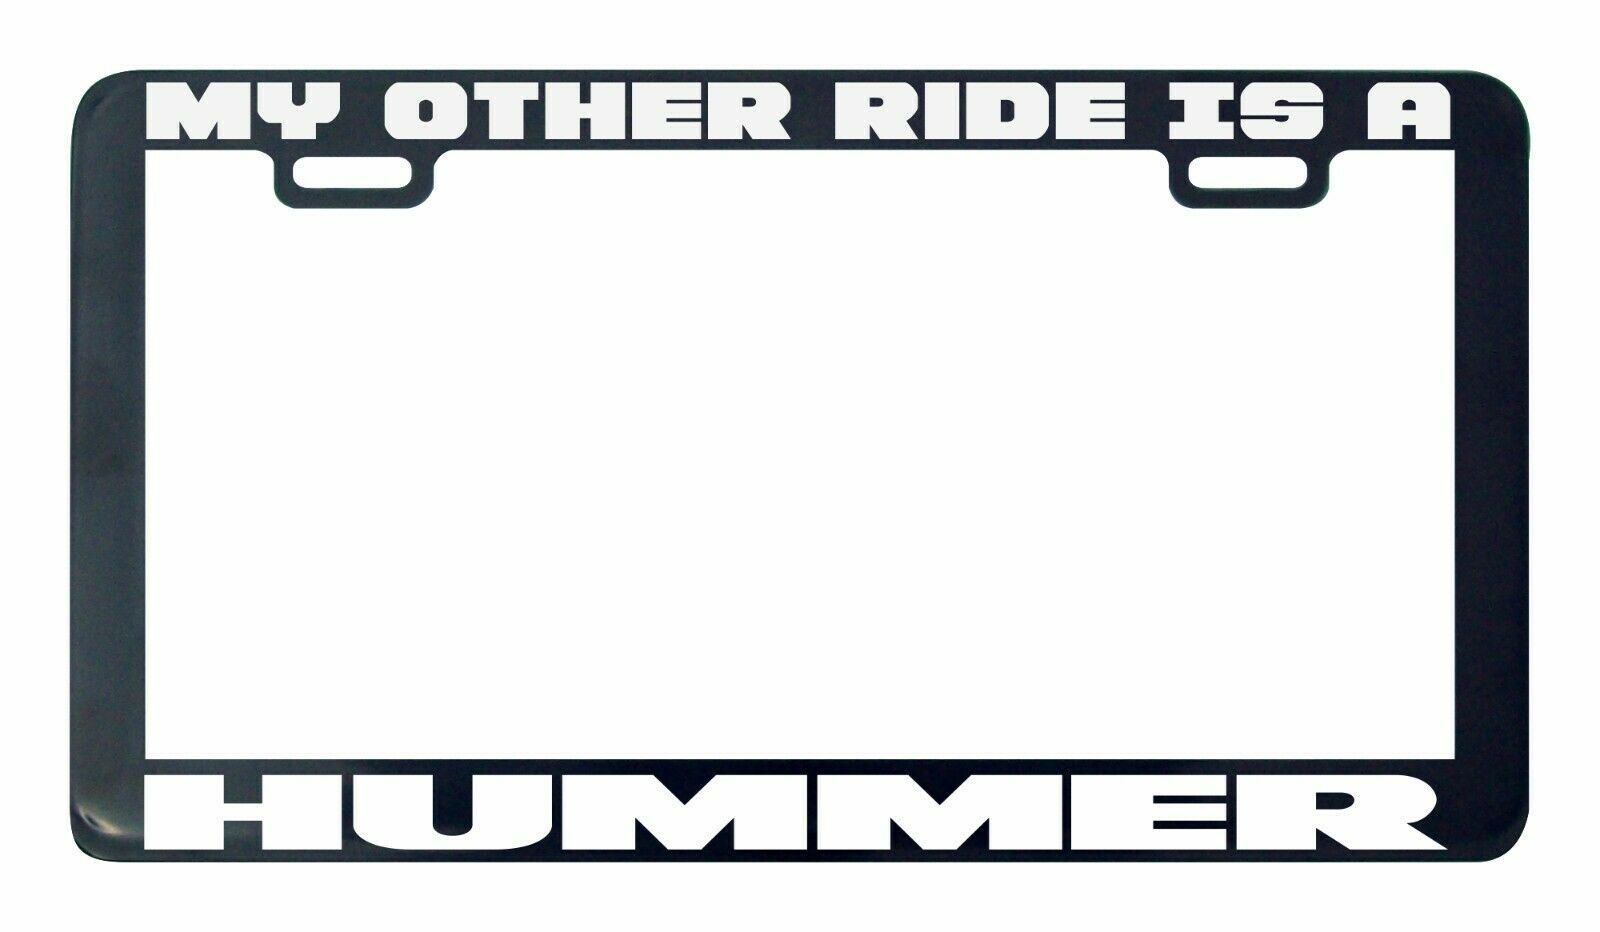 My other ride is a Hummer License plate frame holder tag - $5.99